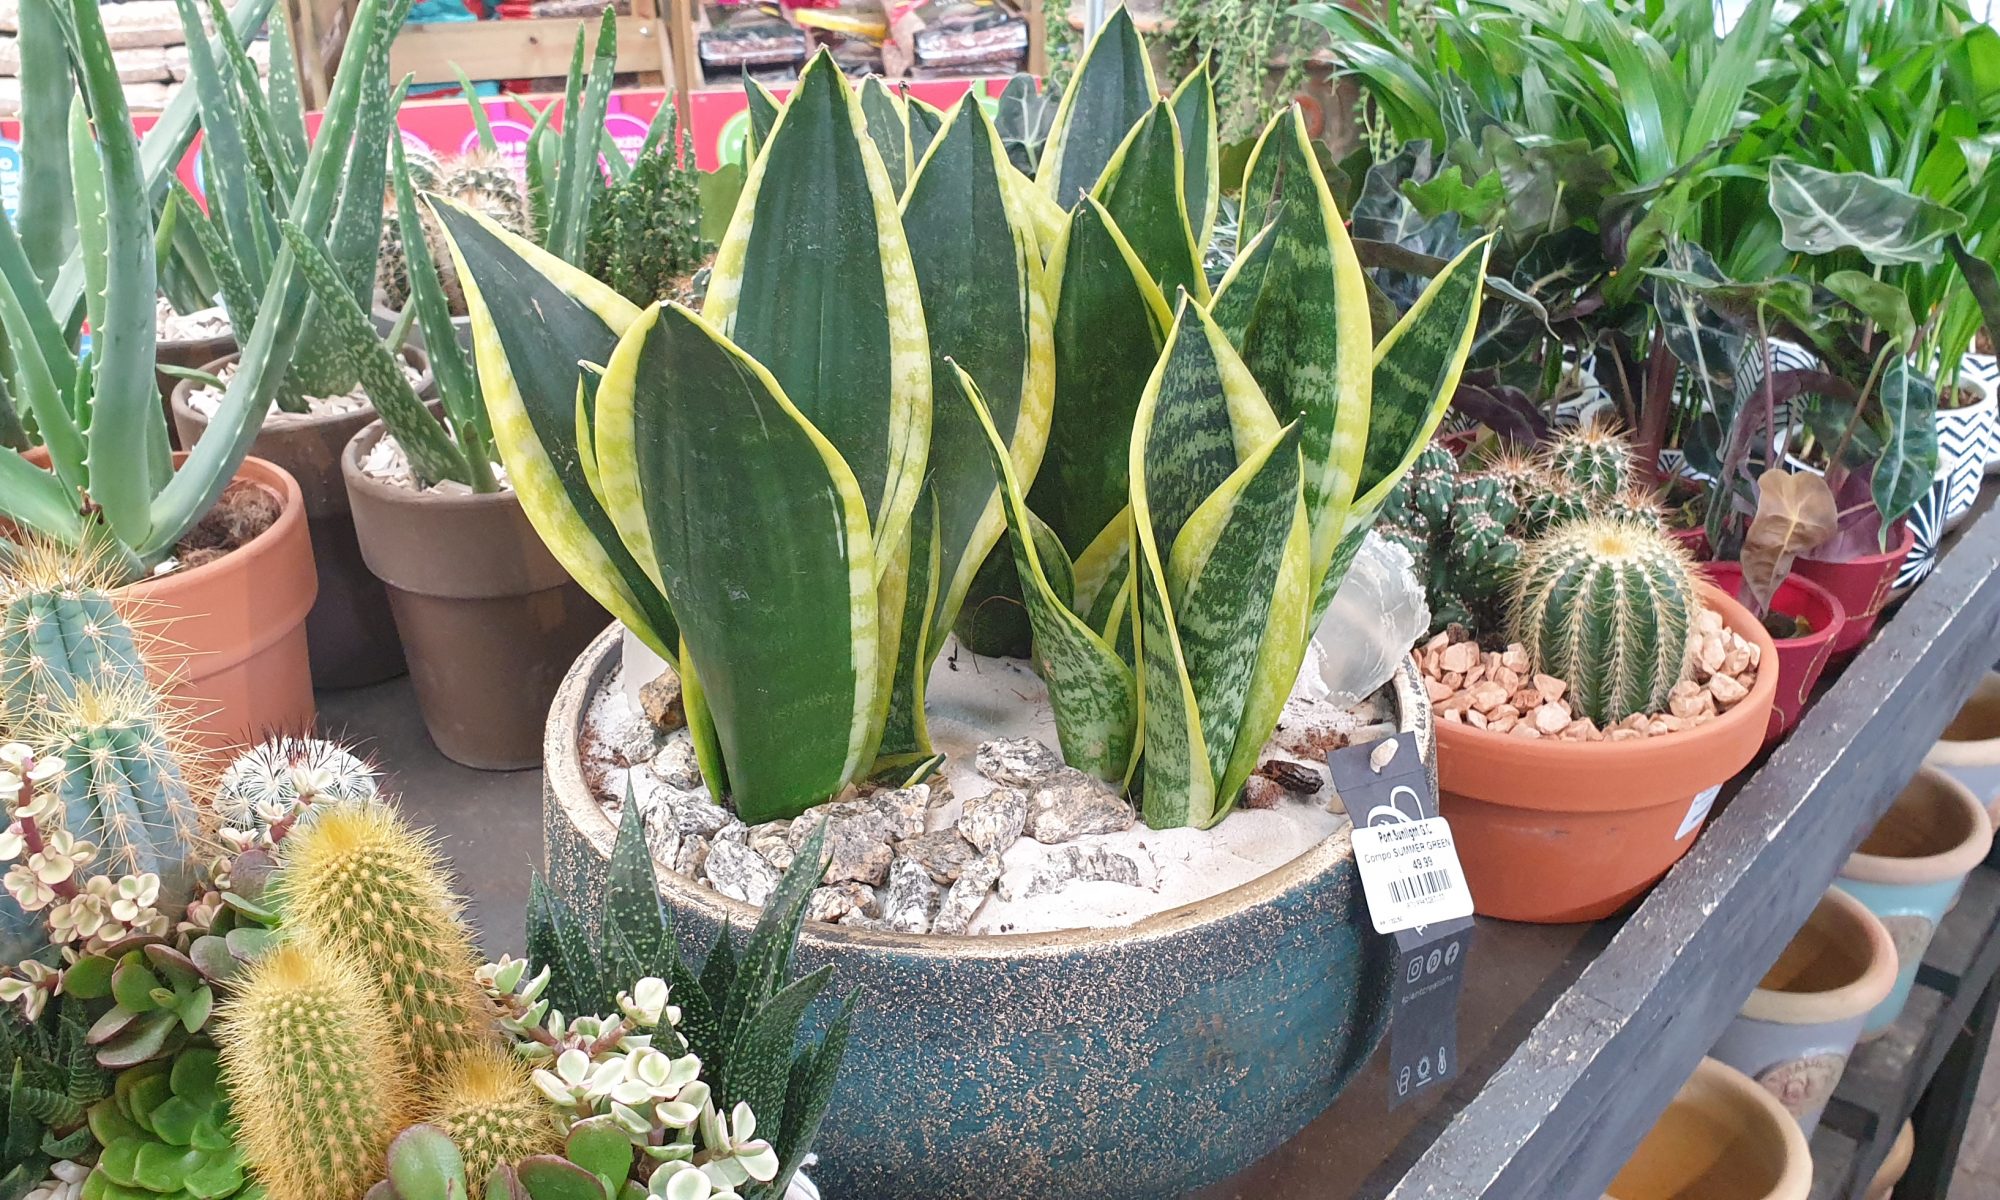 A mothering Laws Tounge plant in a blue bowl